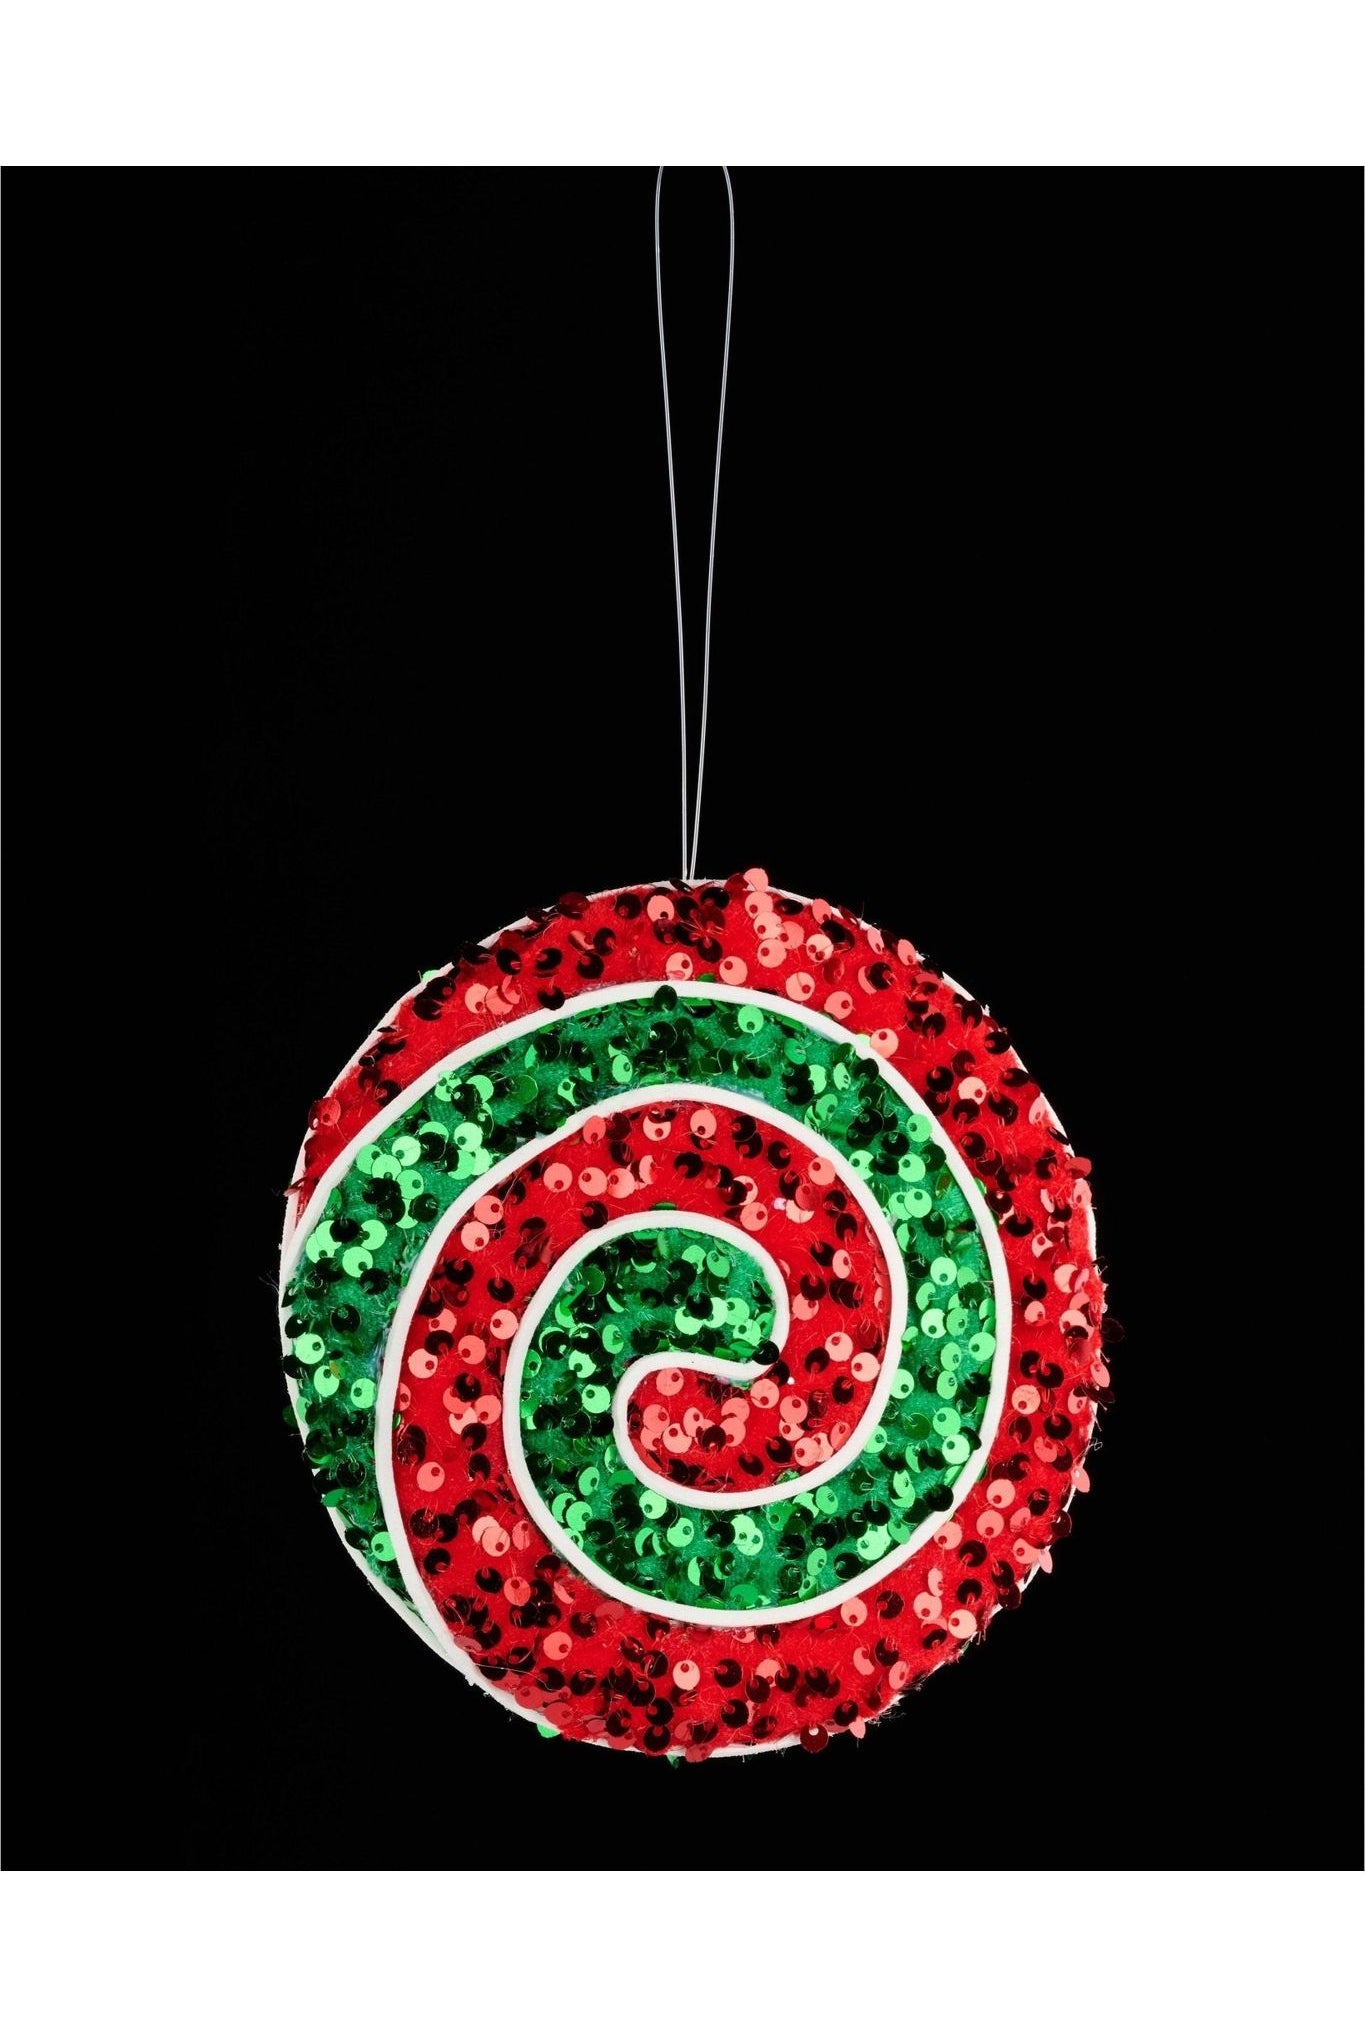 6" Sequin Peppermint Swirl Ornament: Red/Green - Michelle's aDOORable Creations - Holiday Ornaments